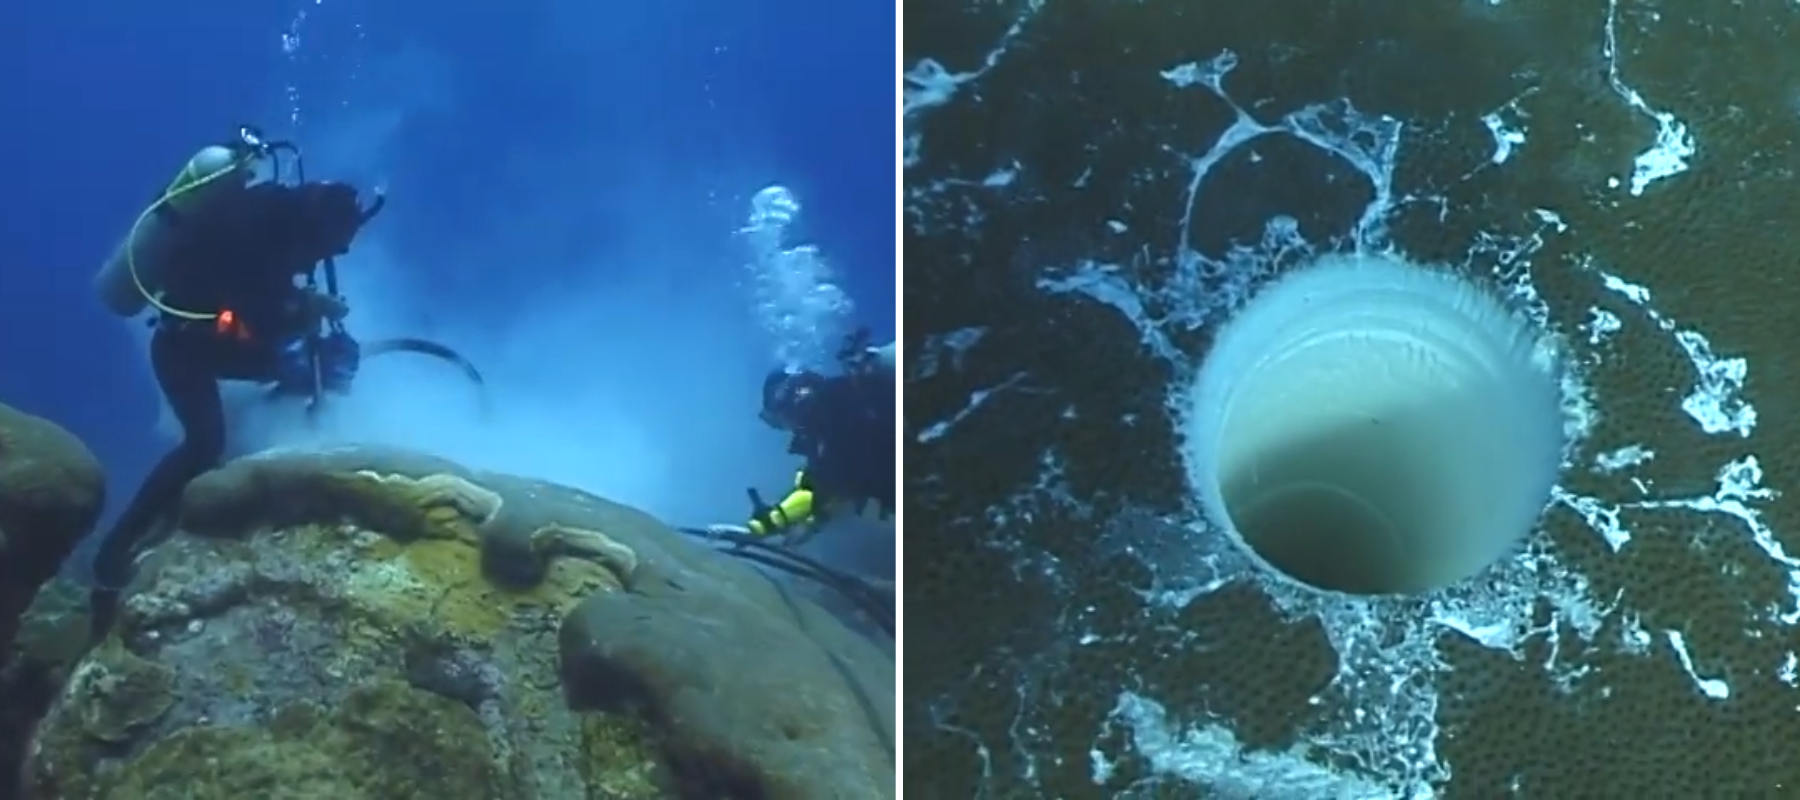 Left: Divers drill into a coral bed. Right: A hole bored into hard coral.